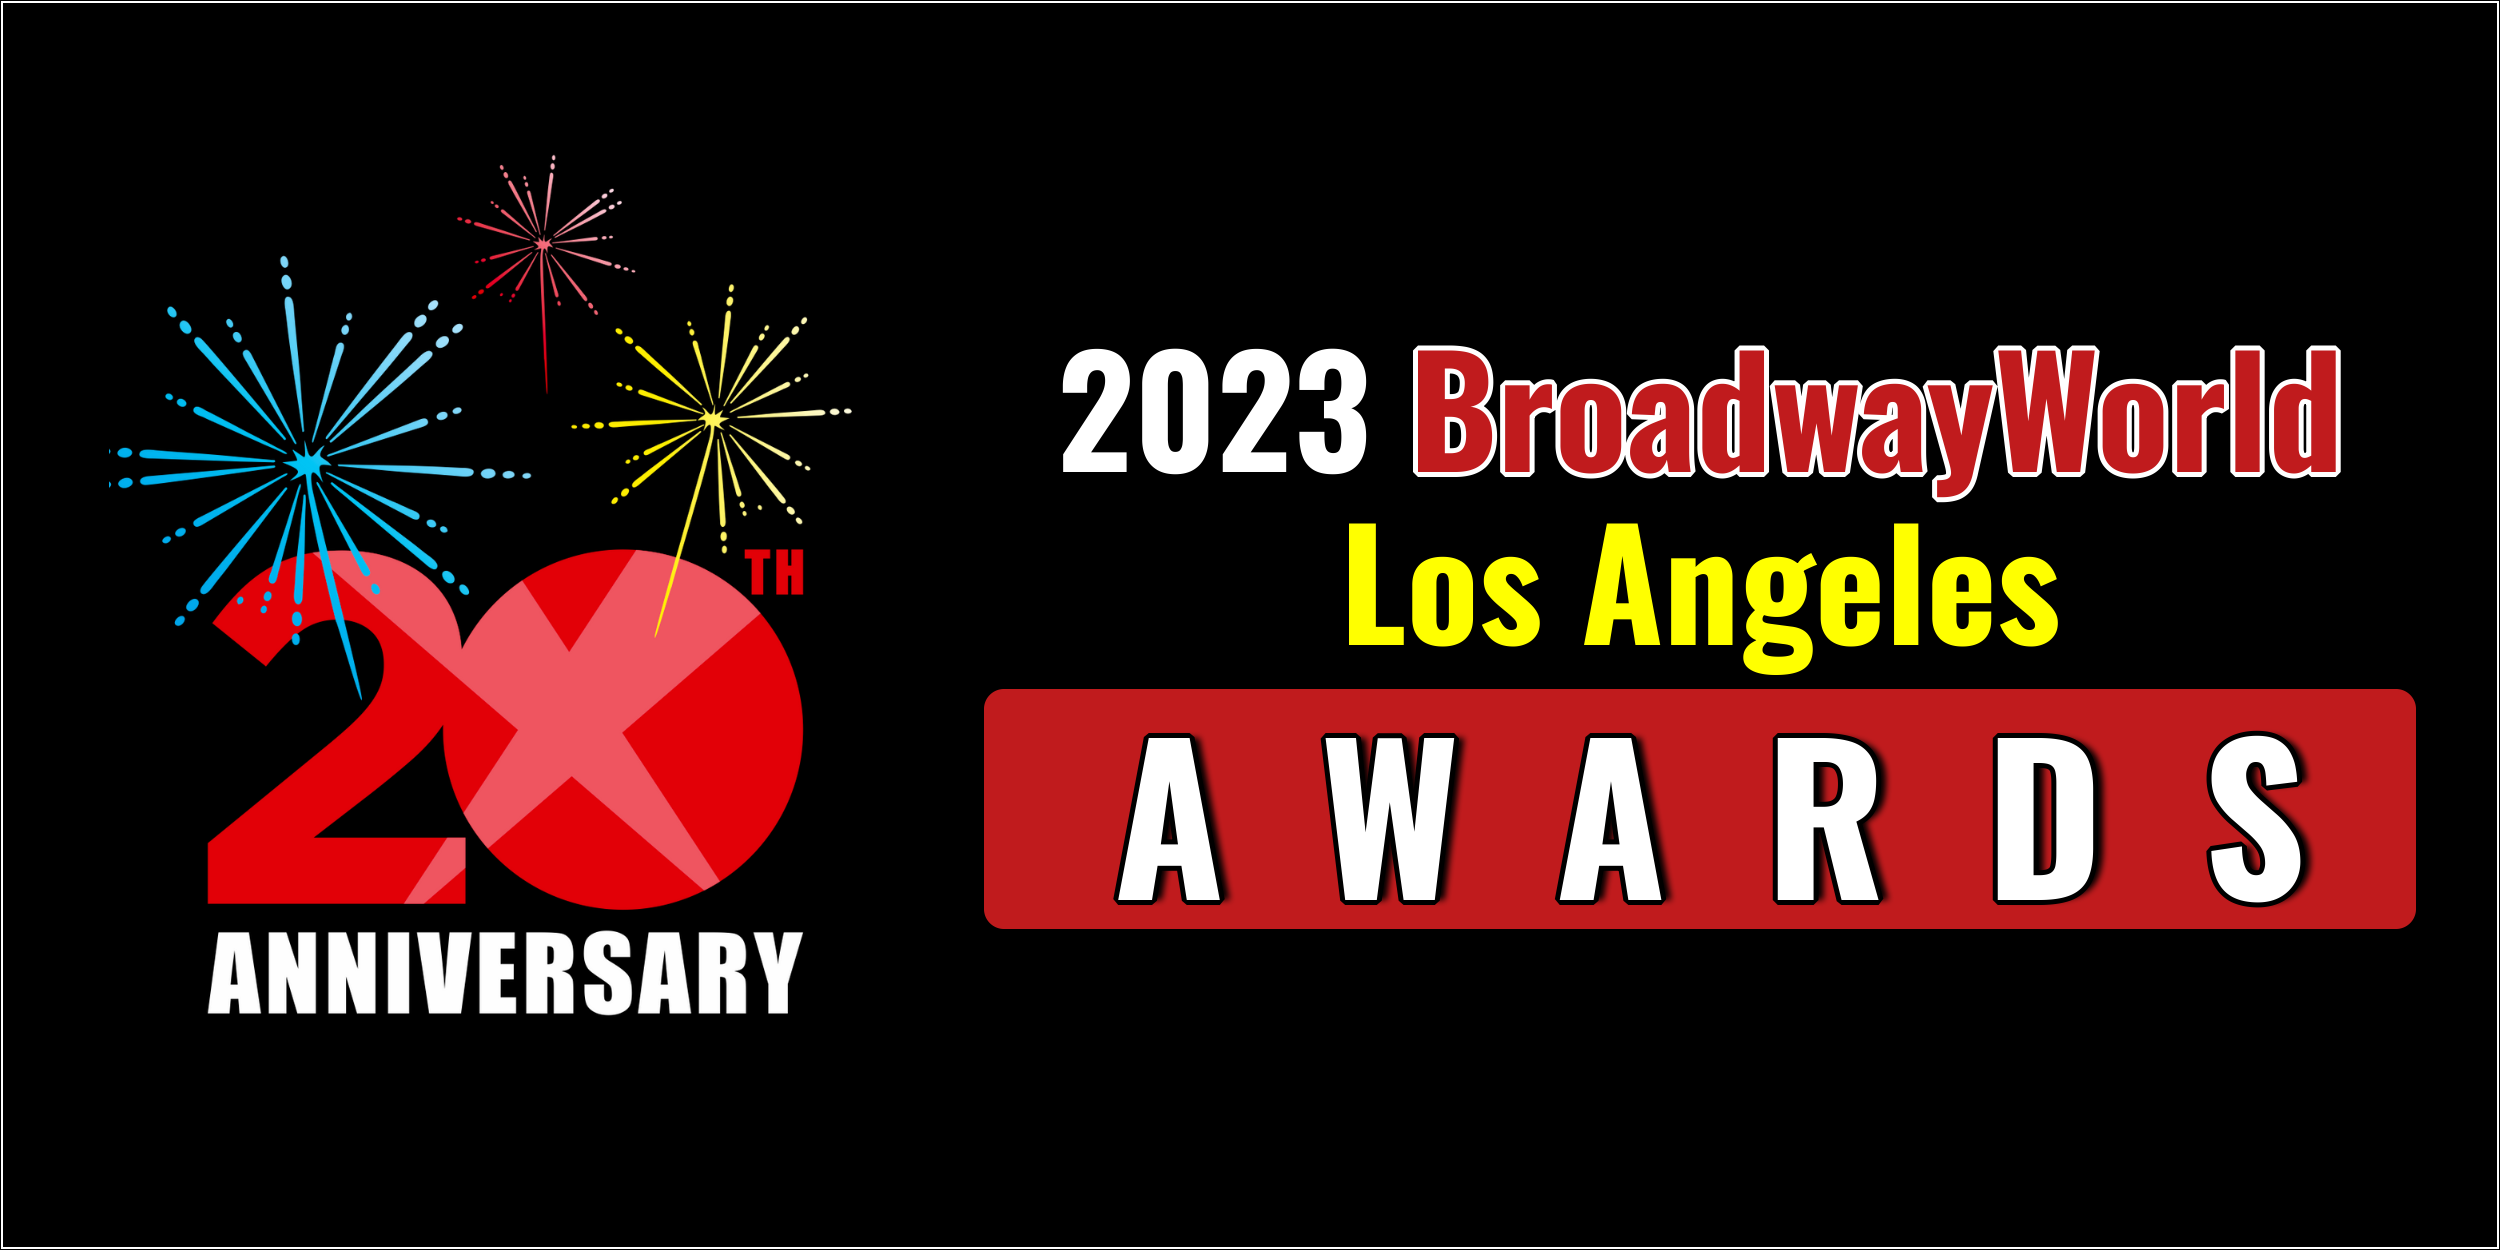 Latest Standings Announced For The 2023 BroadwayWorld Los Angeles Awards; 1984 Leads Best Play! 